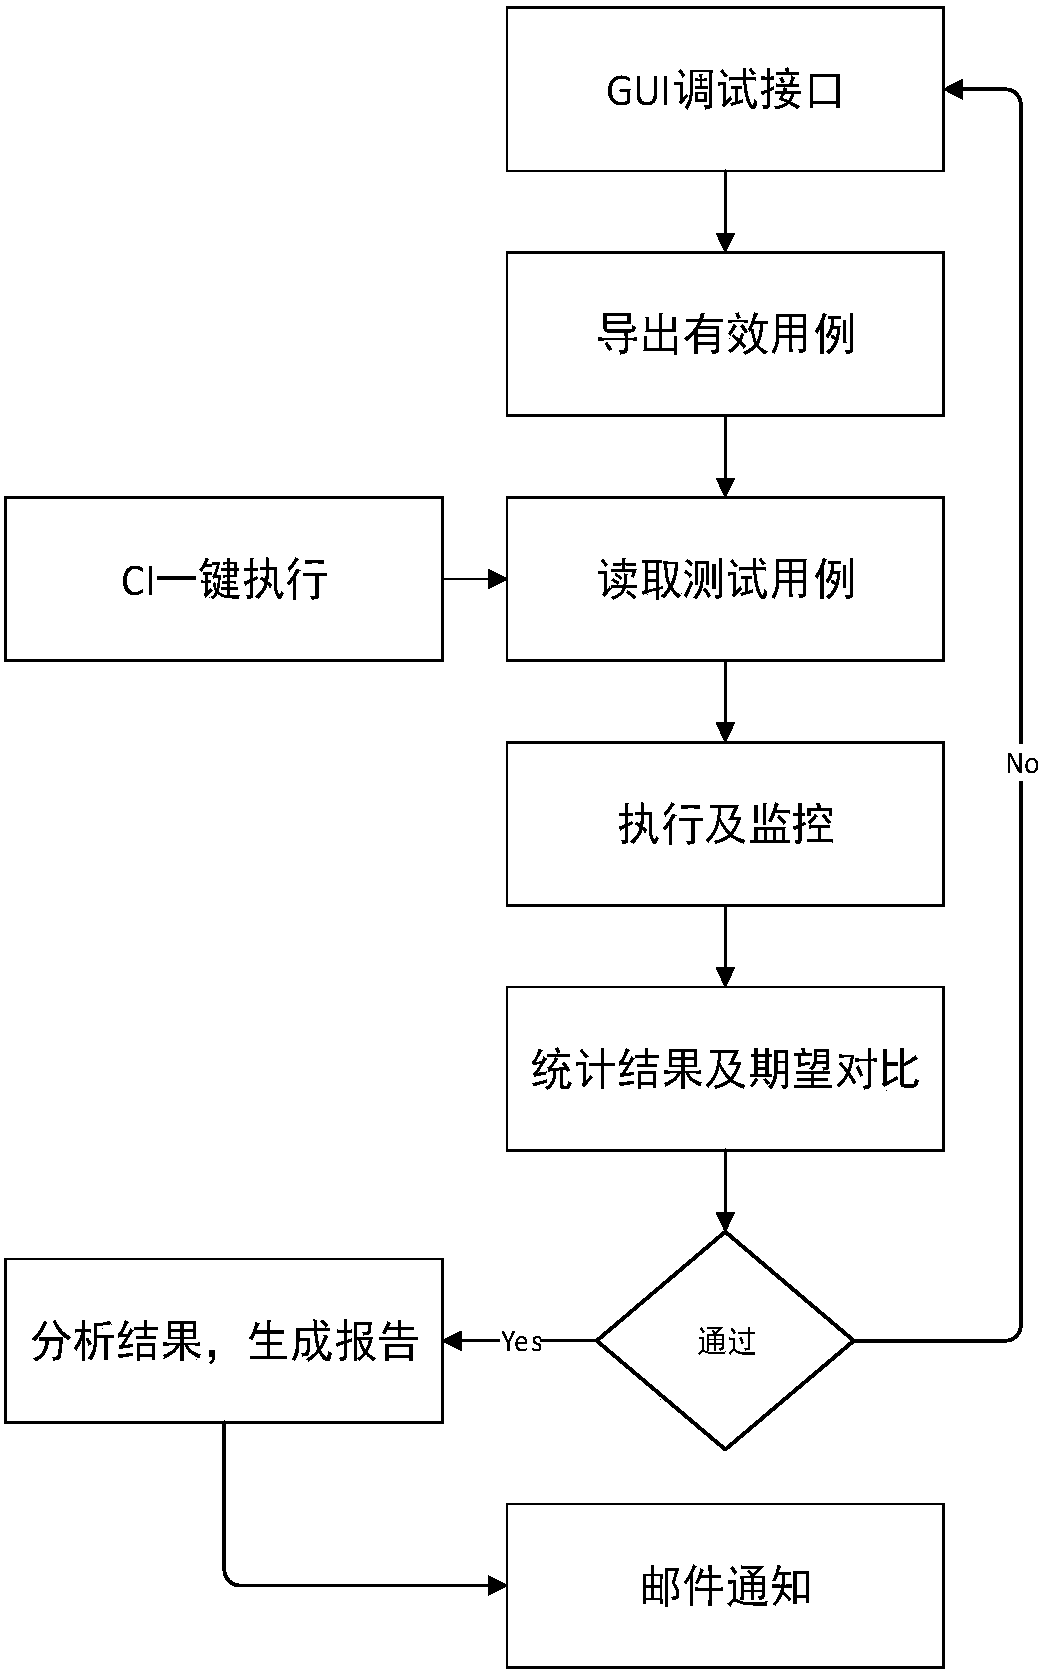 Automated testing system and method for SDNS (Secure Domain Name System) interface